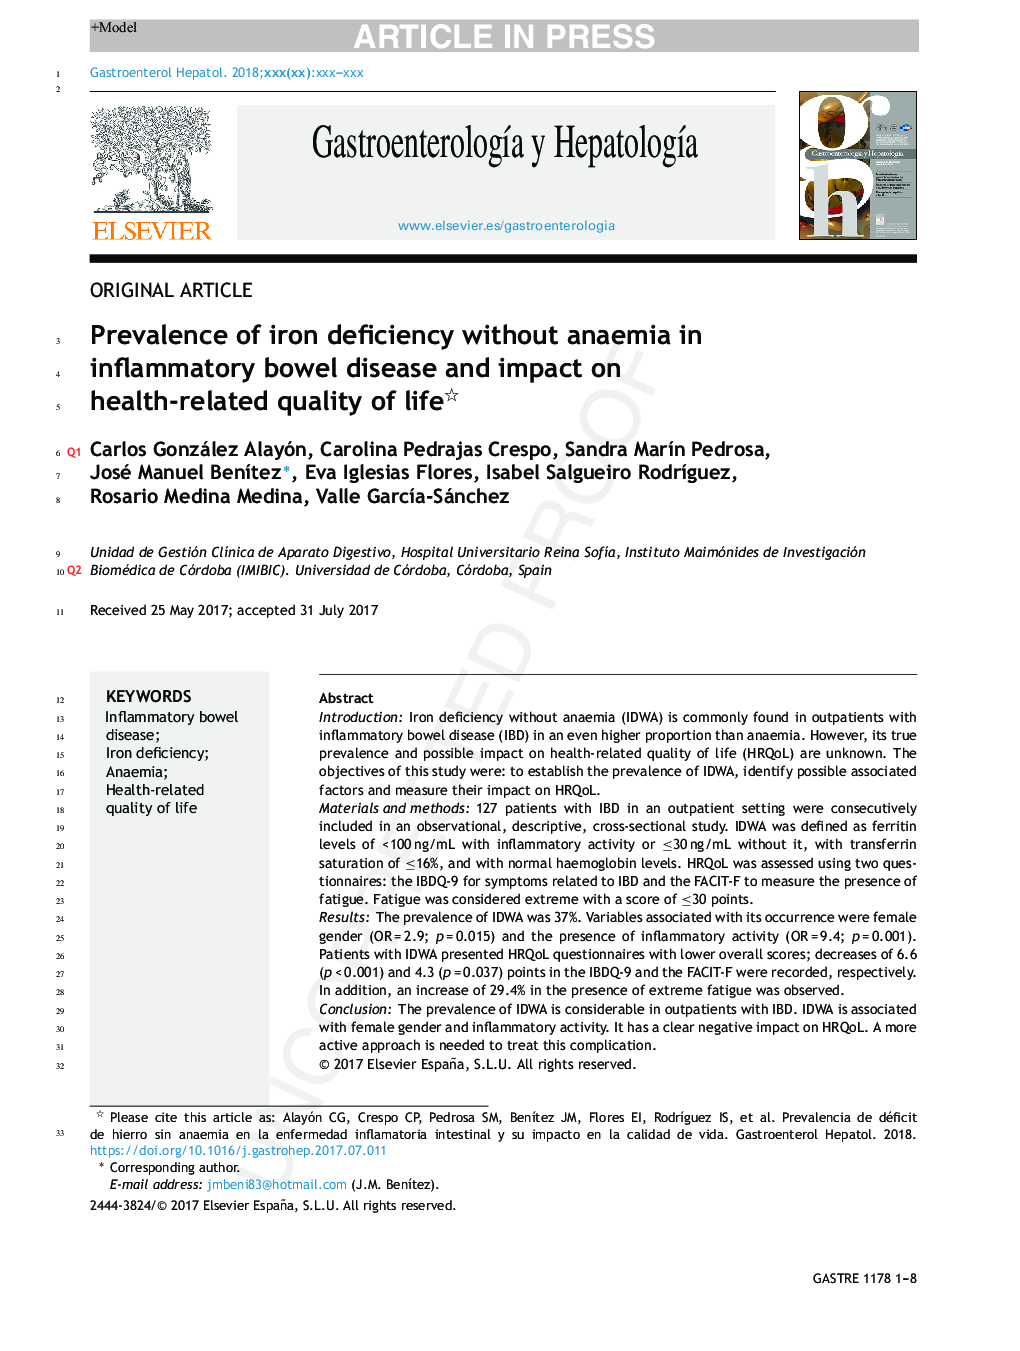 Prevalence of iron deficiency without anaemia in inflammatory bowel disease and impact on health-related quality of life